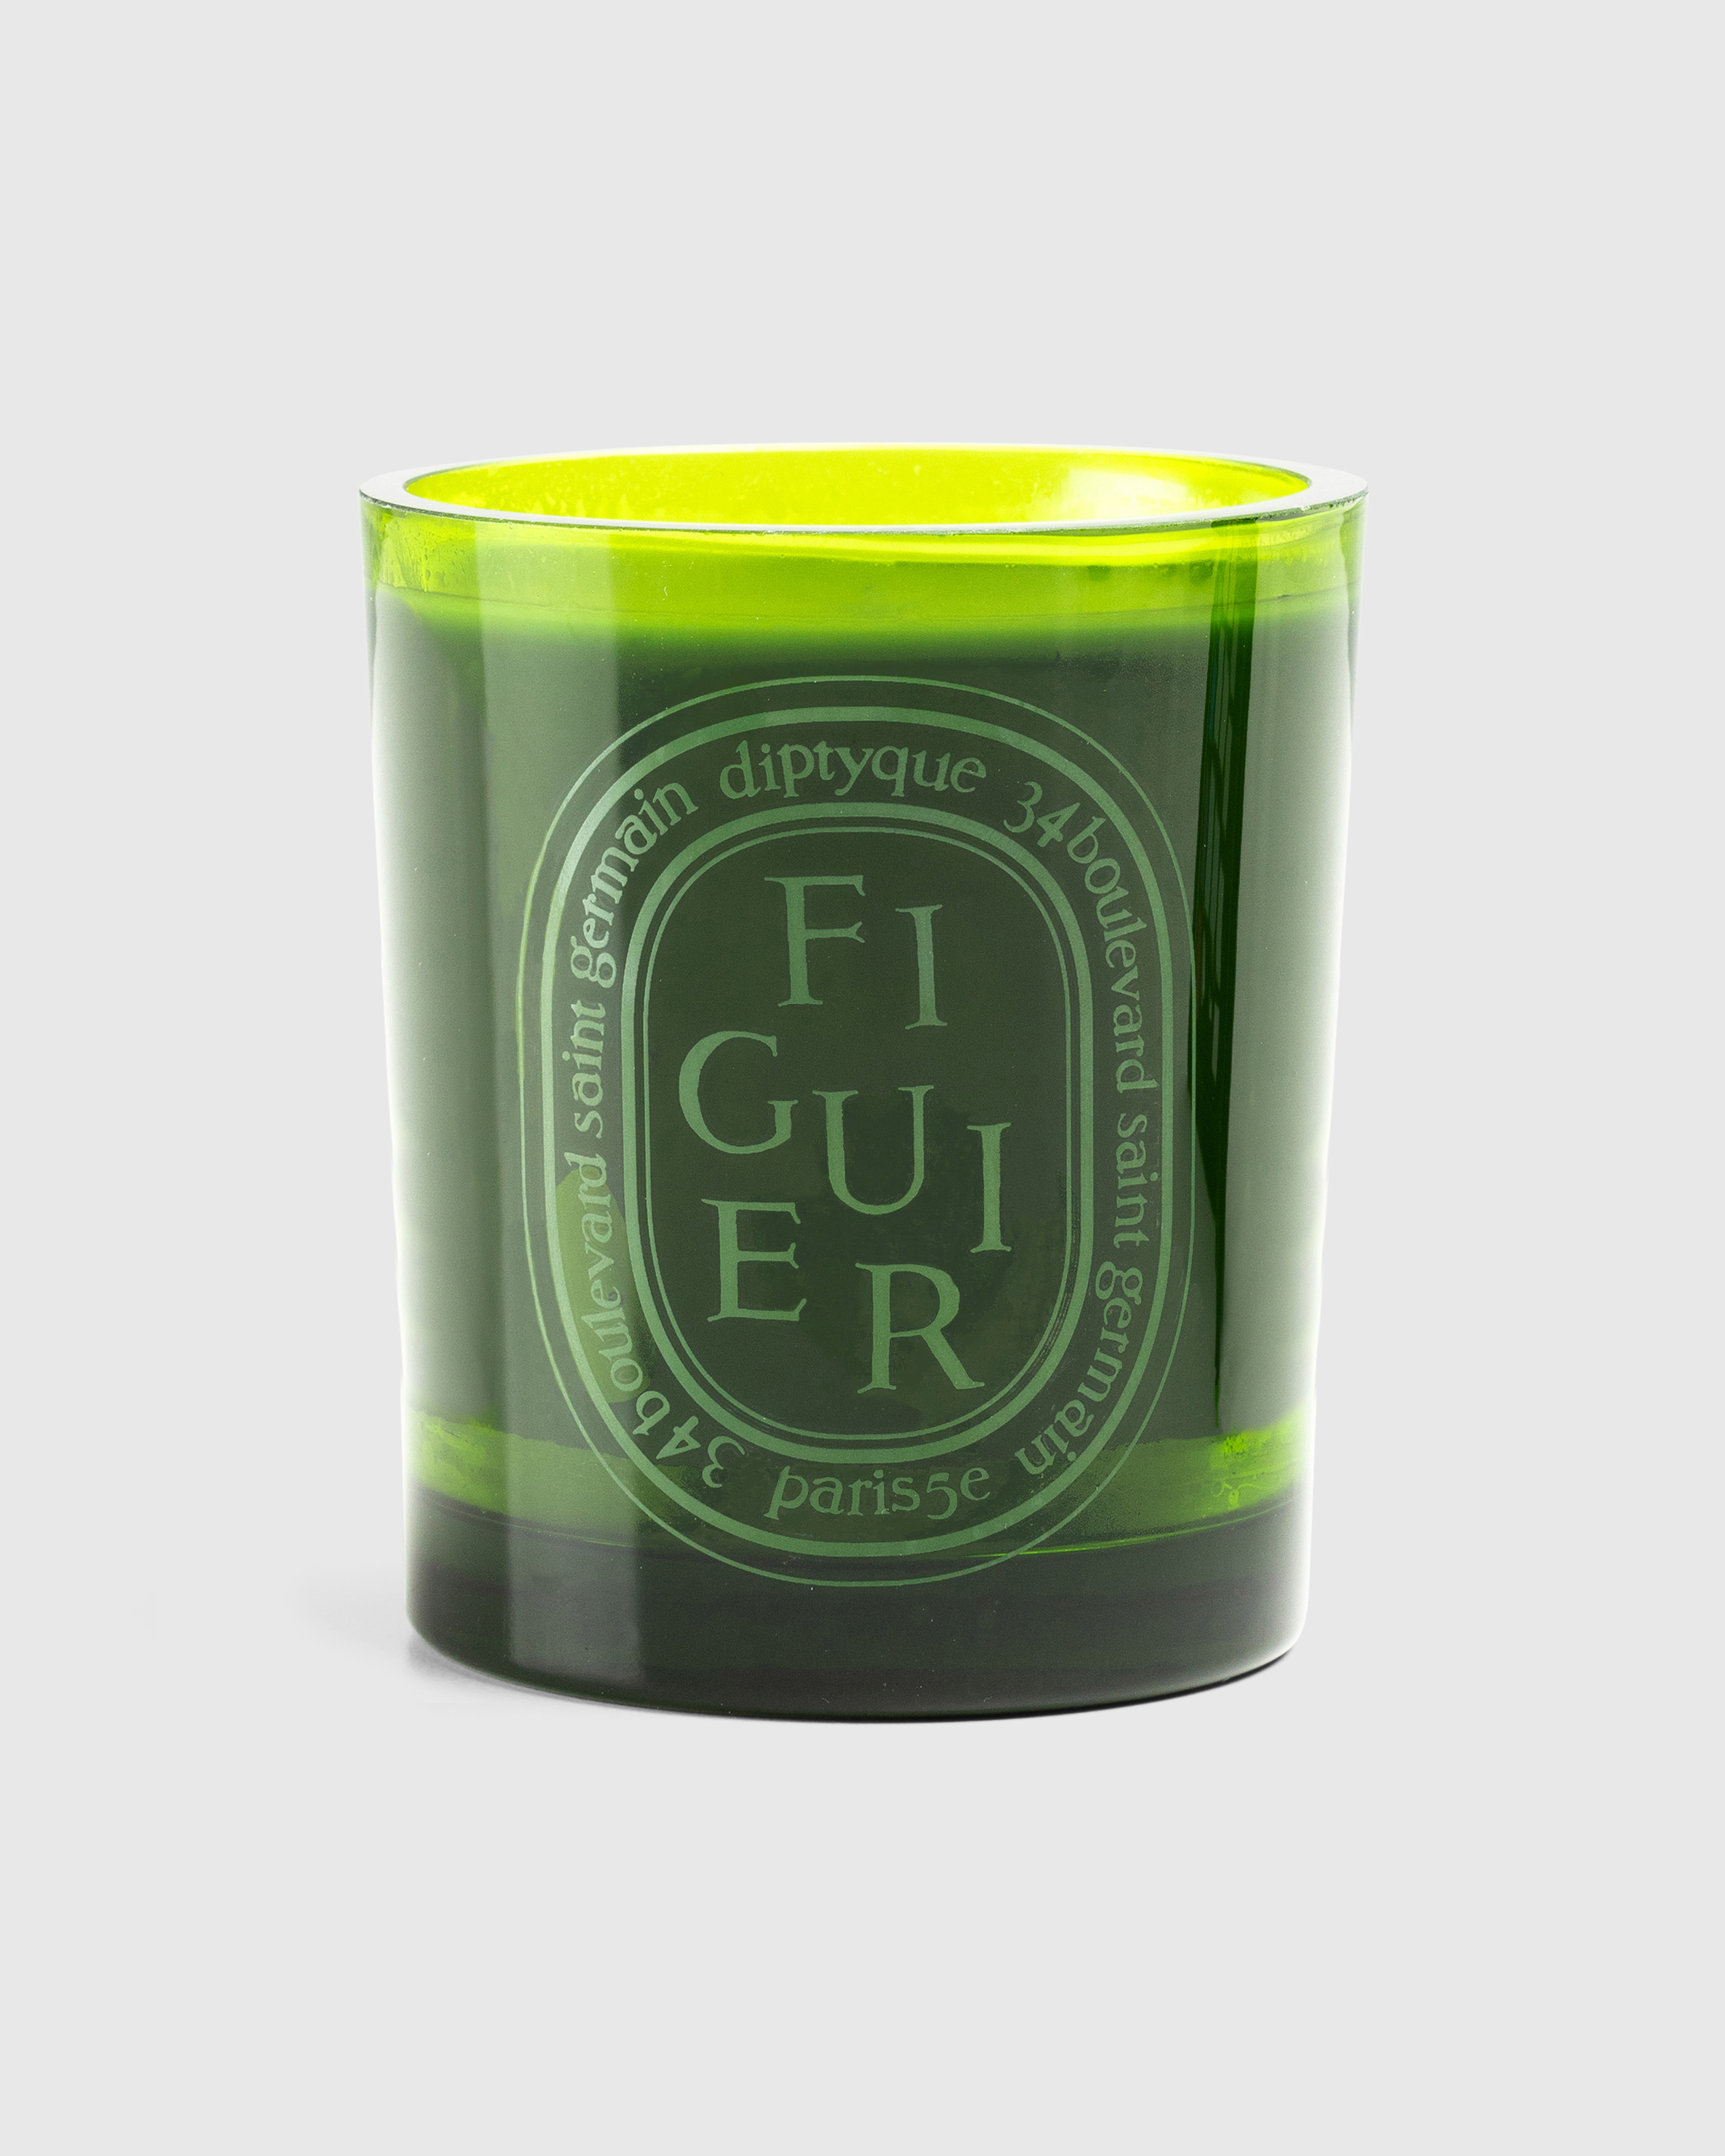 Diptyque – Green Candle Figuier 300g - Candles & Fragrances - Green - Image 1